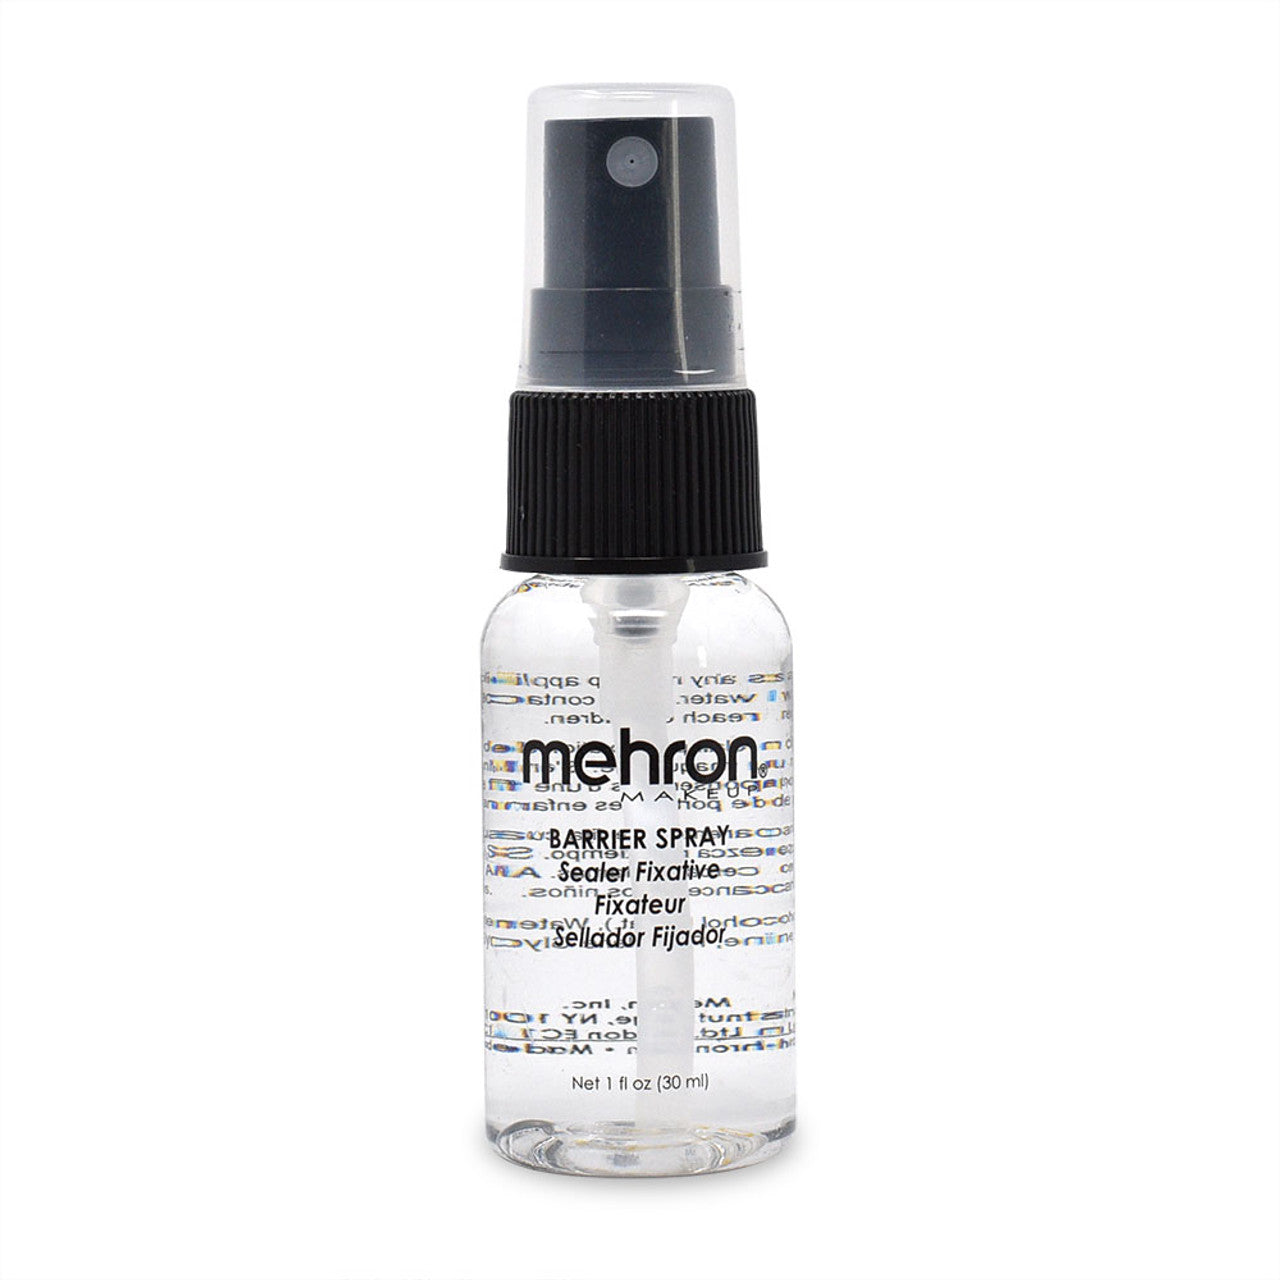 Barrier Spray - 1oz. Spray Bottle - THEATRICAL STAGE MAKEUP, ADHESIVES and  REMOVERS